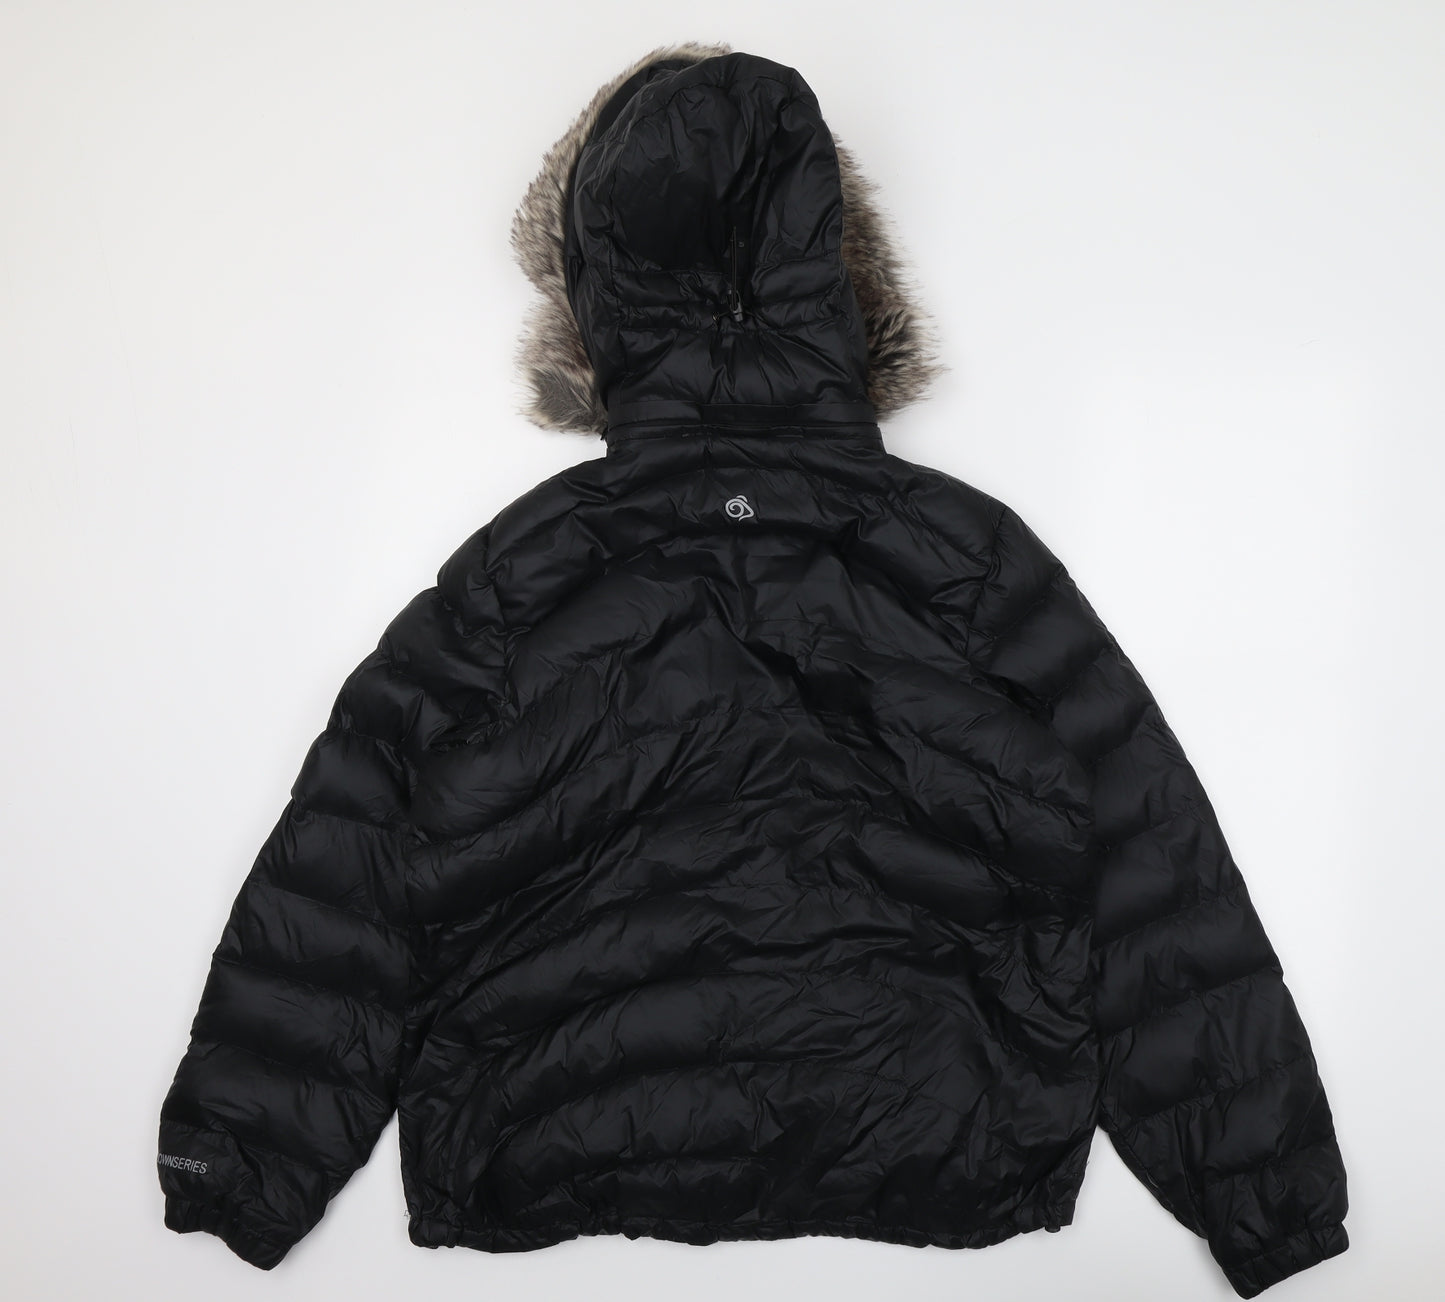 Craghoppers Womens Black Quilted Jacket Size 14 Zip